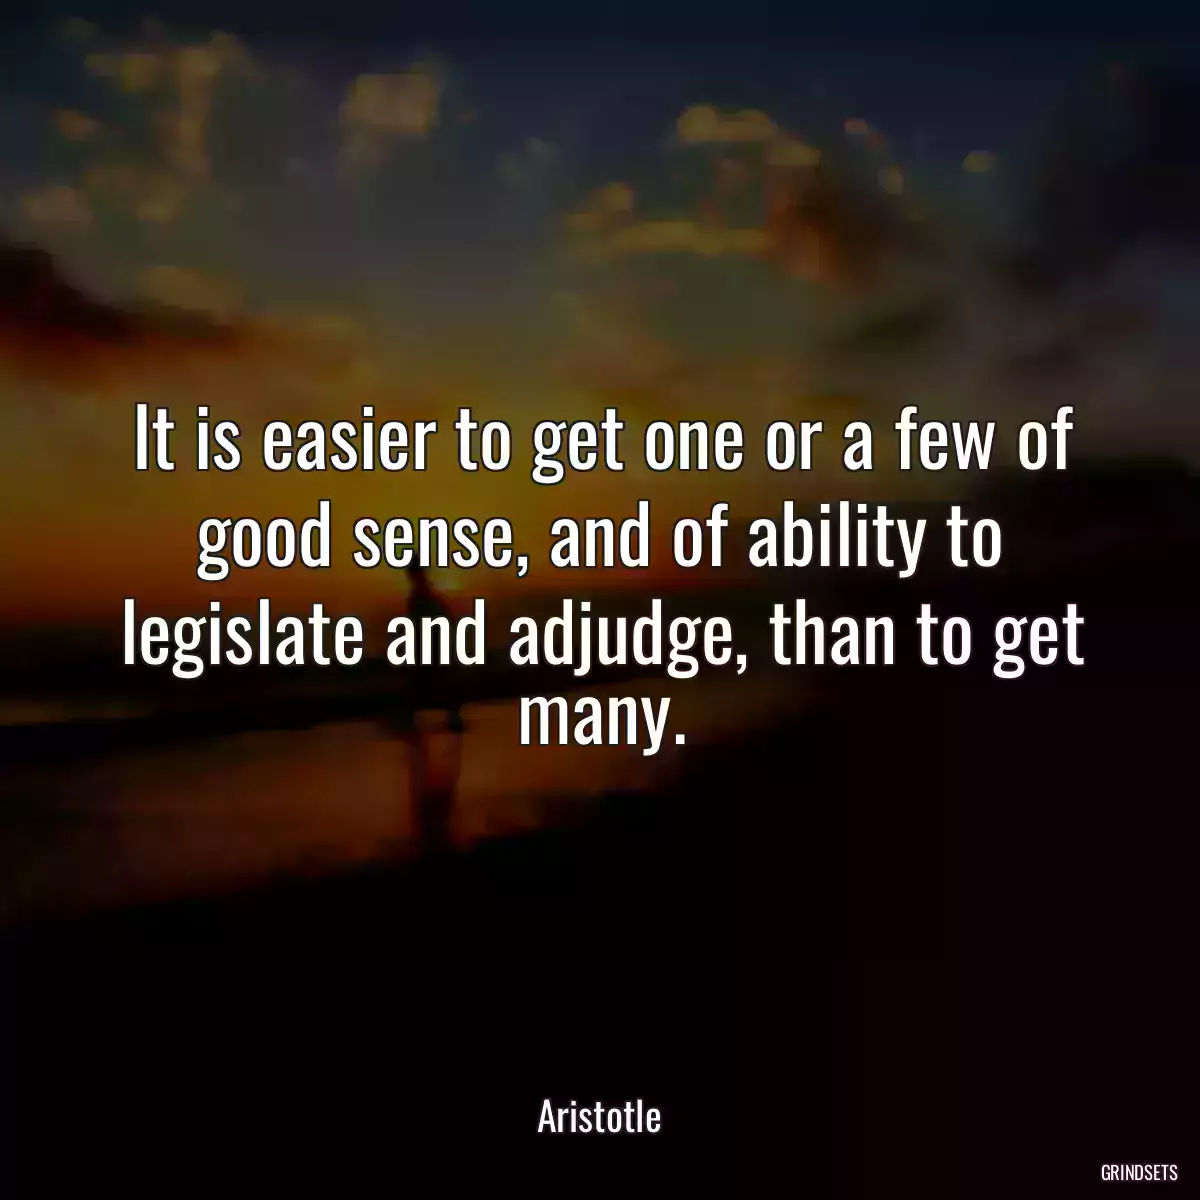 It is easier to get one or a few of good sense, and of ability to legislate and adjudge, than to get many.